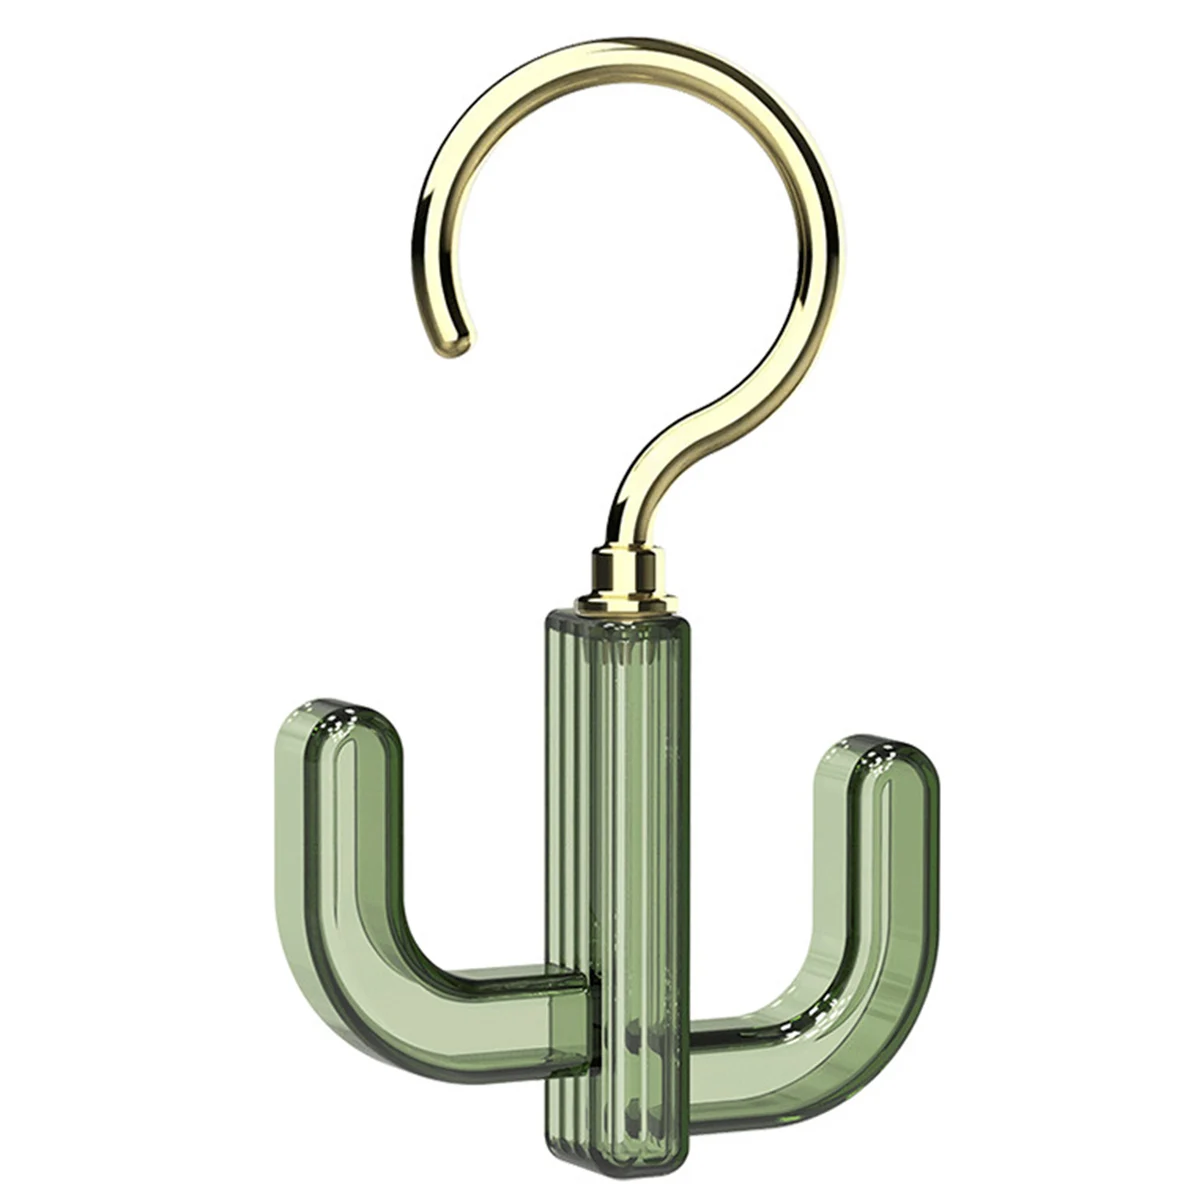 Twirl Hooks Cactus Shaped Hangers for Closet 360 ° Rotatable Hook Creative Decroative Wardrobe Bag Hook with 2 Claws Belt Hanger